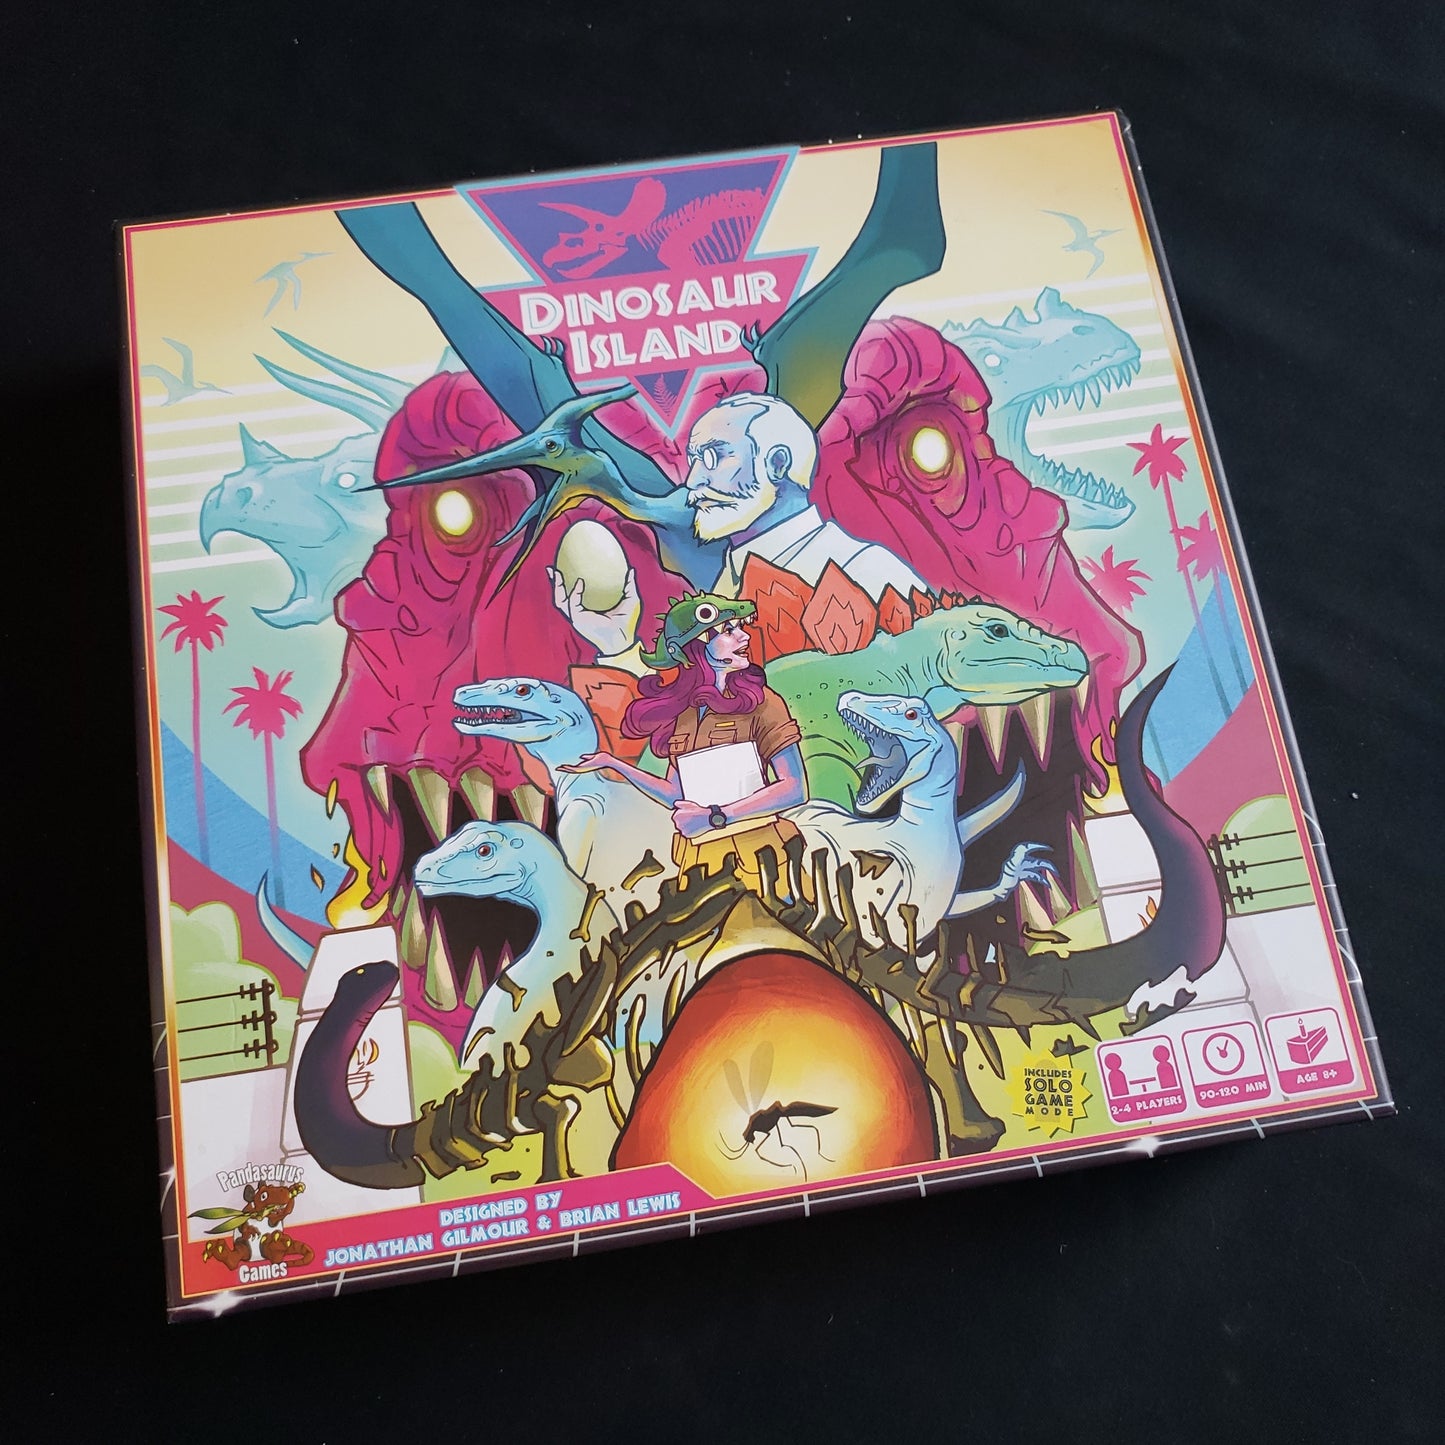 Image shows the front cover of the box of the Dinosaur Island board game